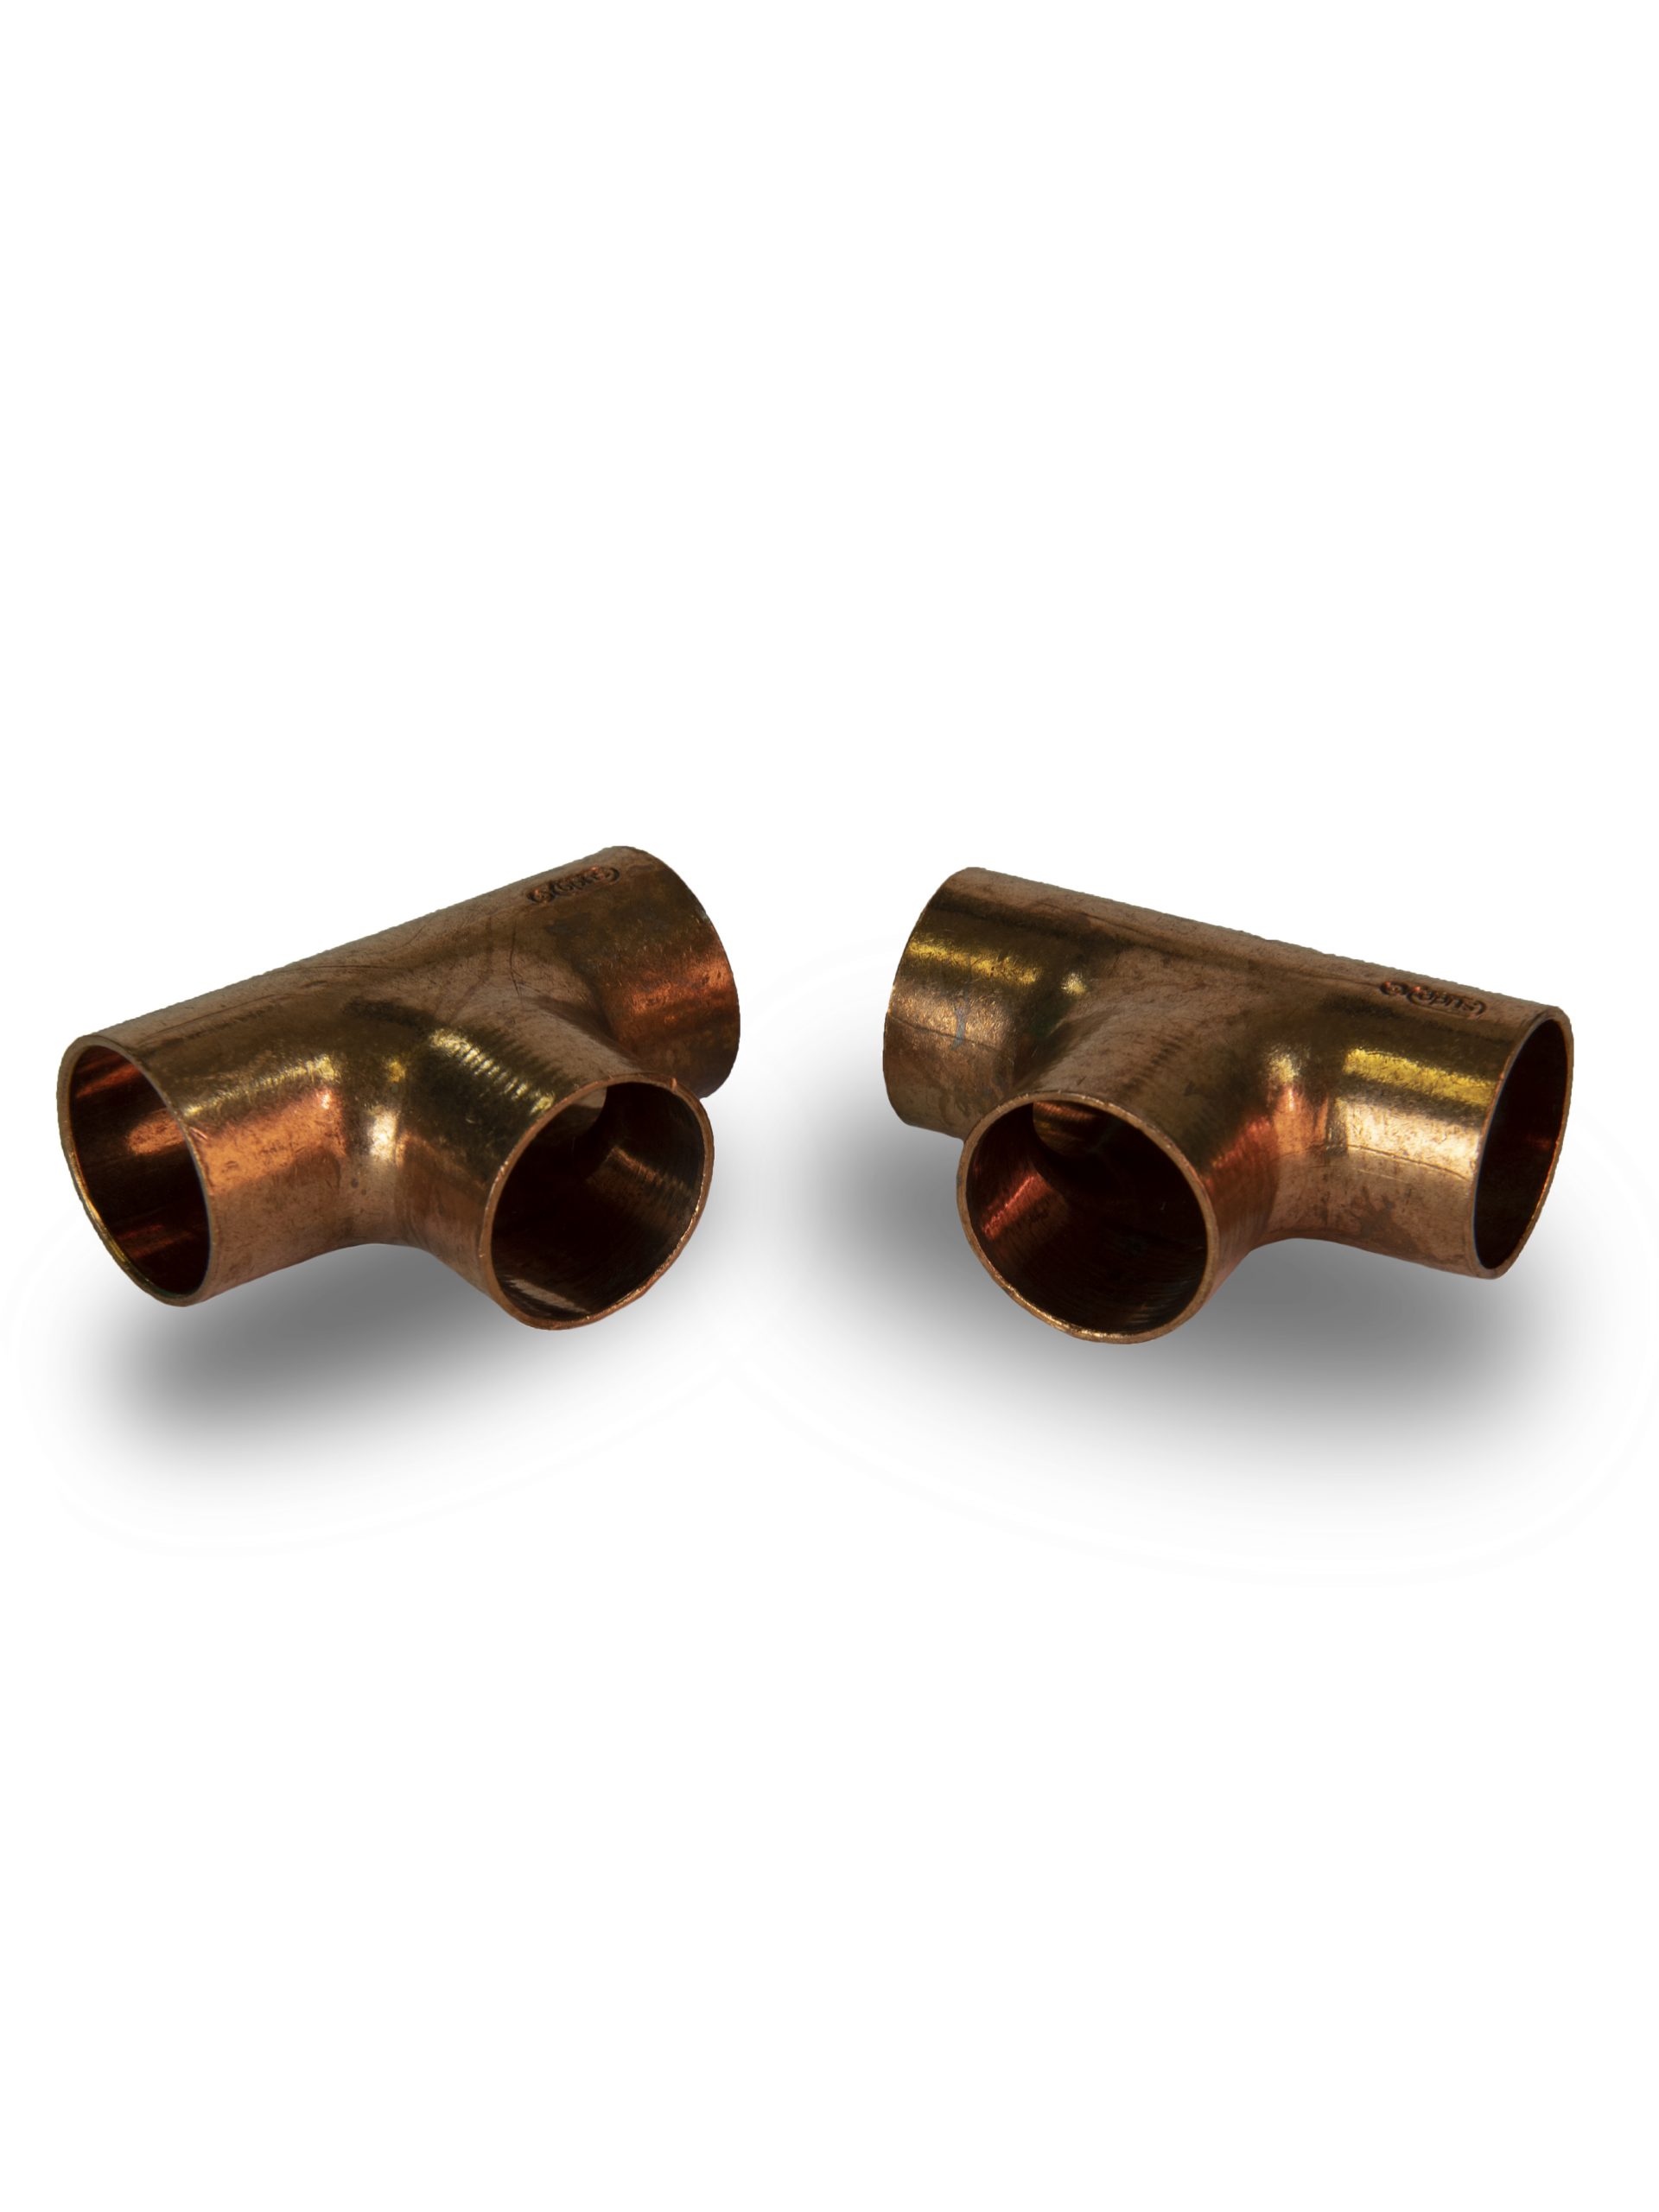 COPPER TEE 15MM, COMAP-CLESSE from Gas Equipment Company Llc Abu Dhabi, UNITED ARAB EMIRATES